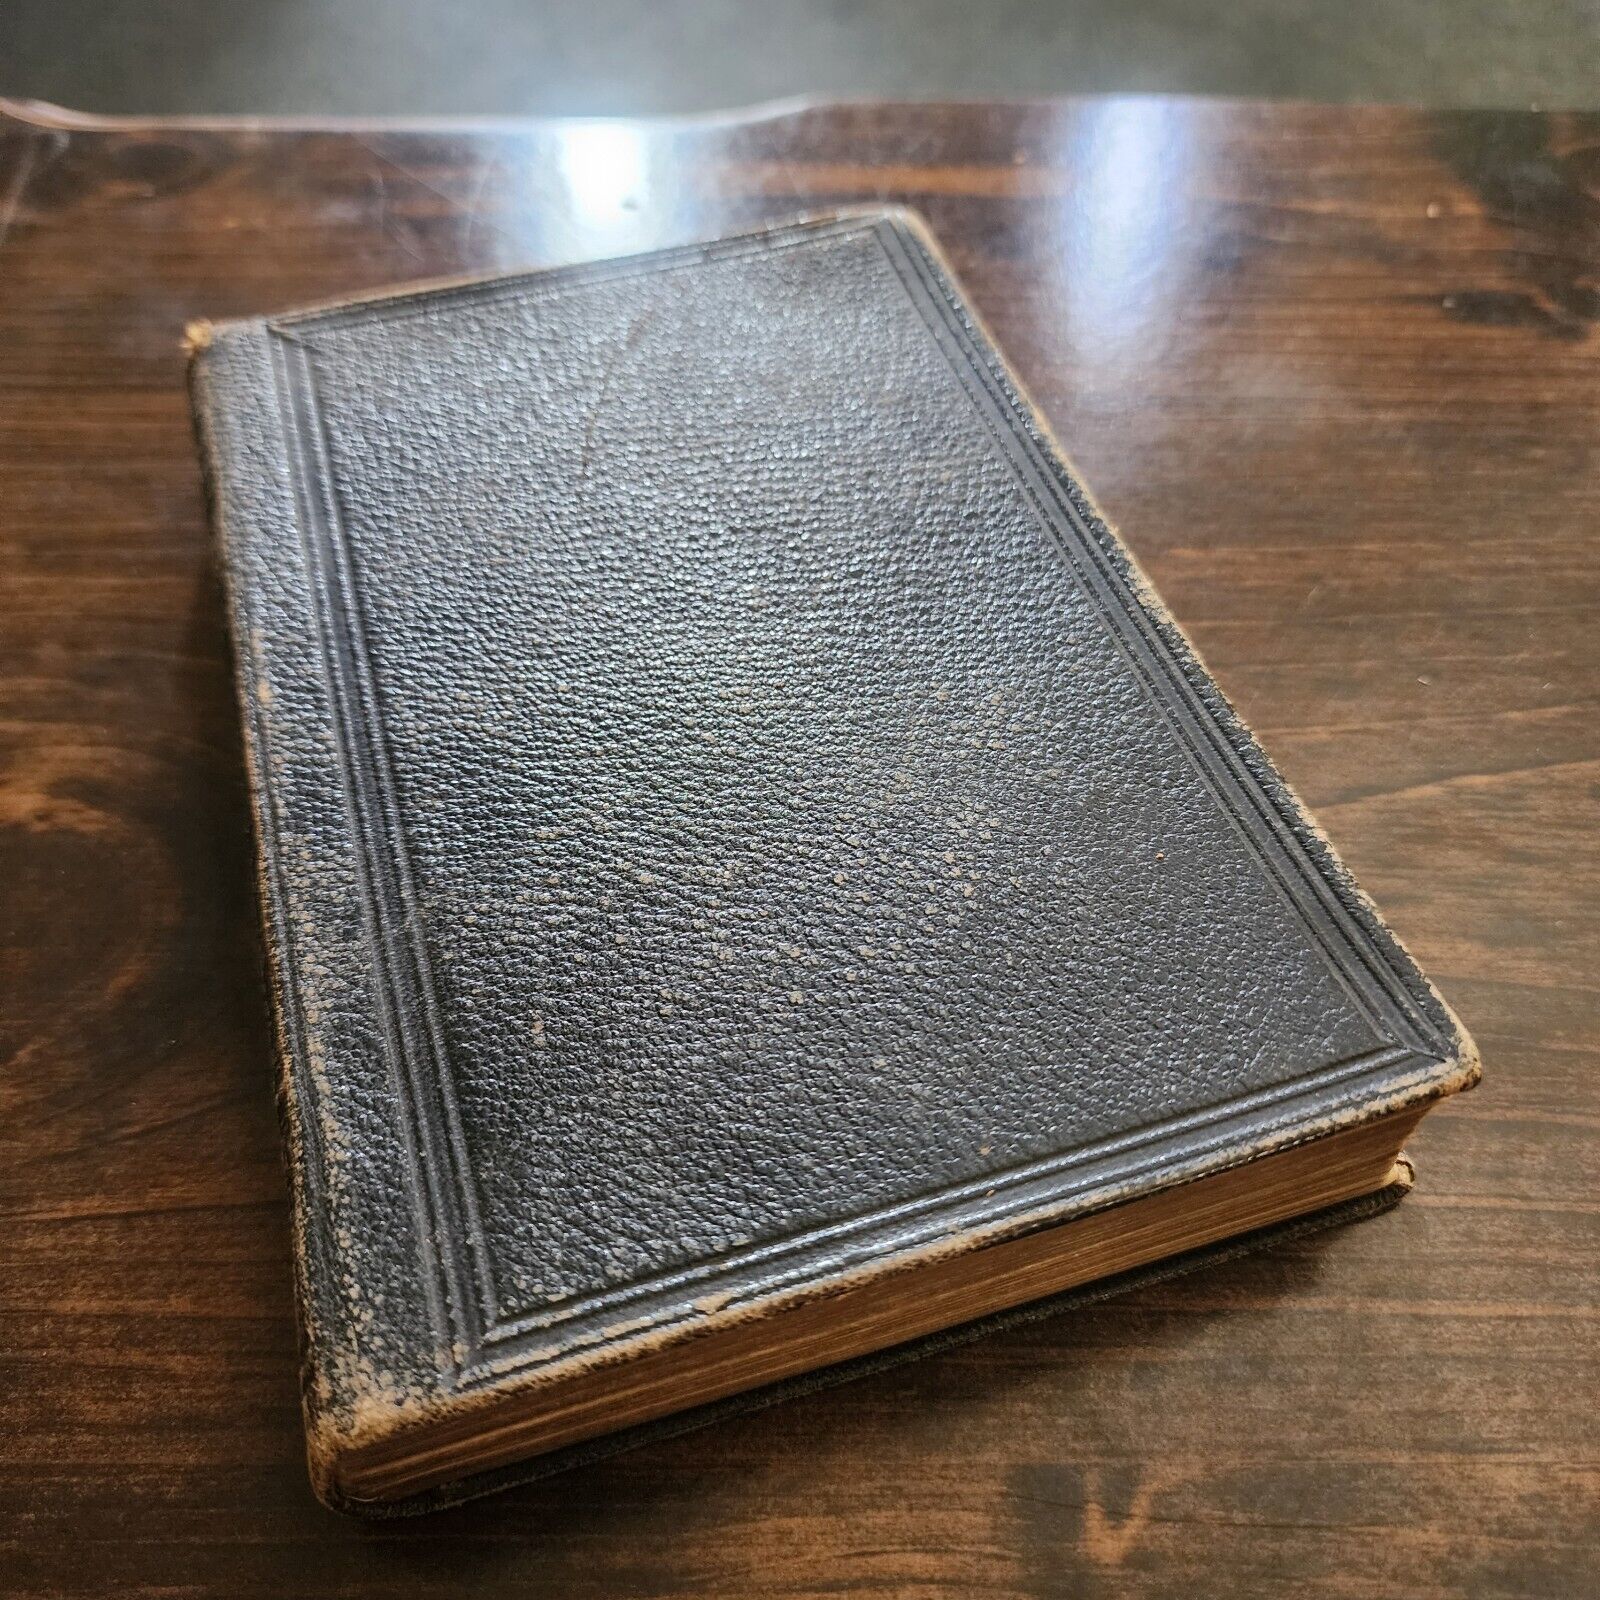 ☆ Antique ☆ The Book of Common Prayer☆ 1875 Eyre and Spottiswoode ☆ 